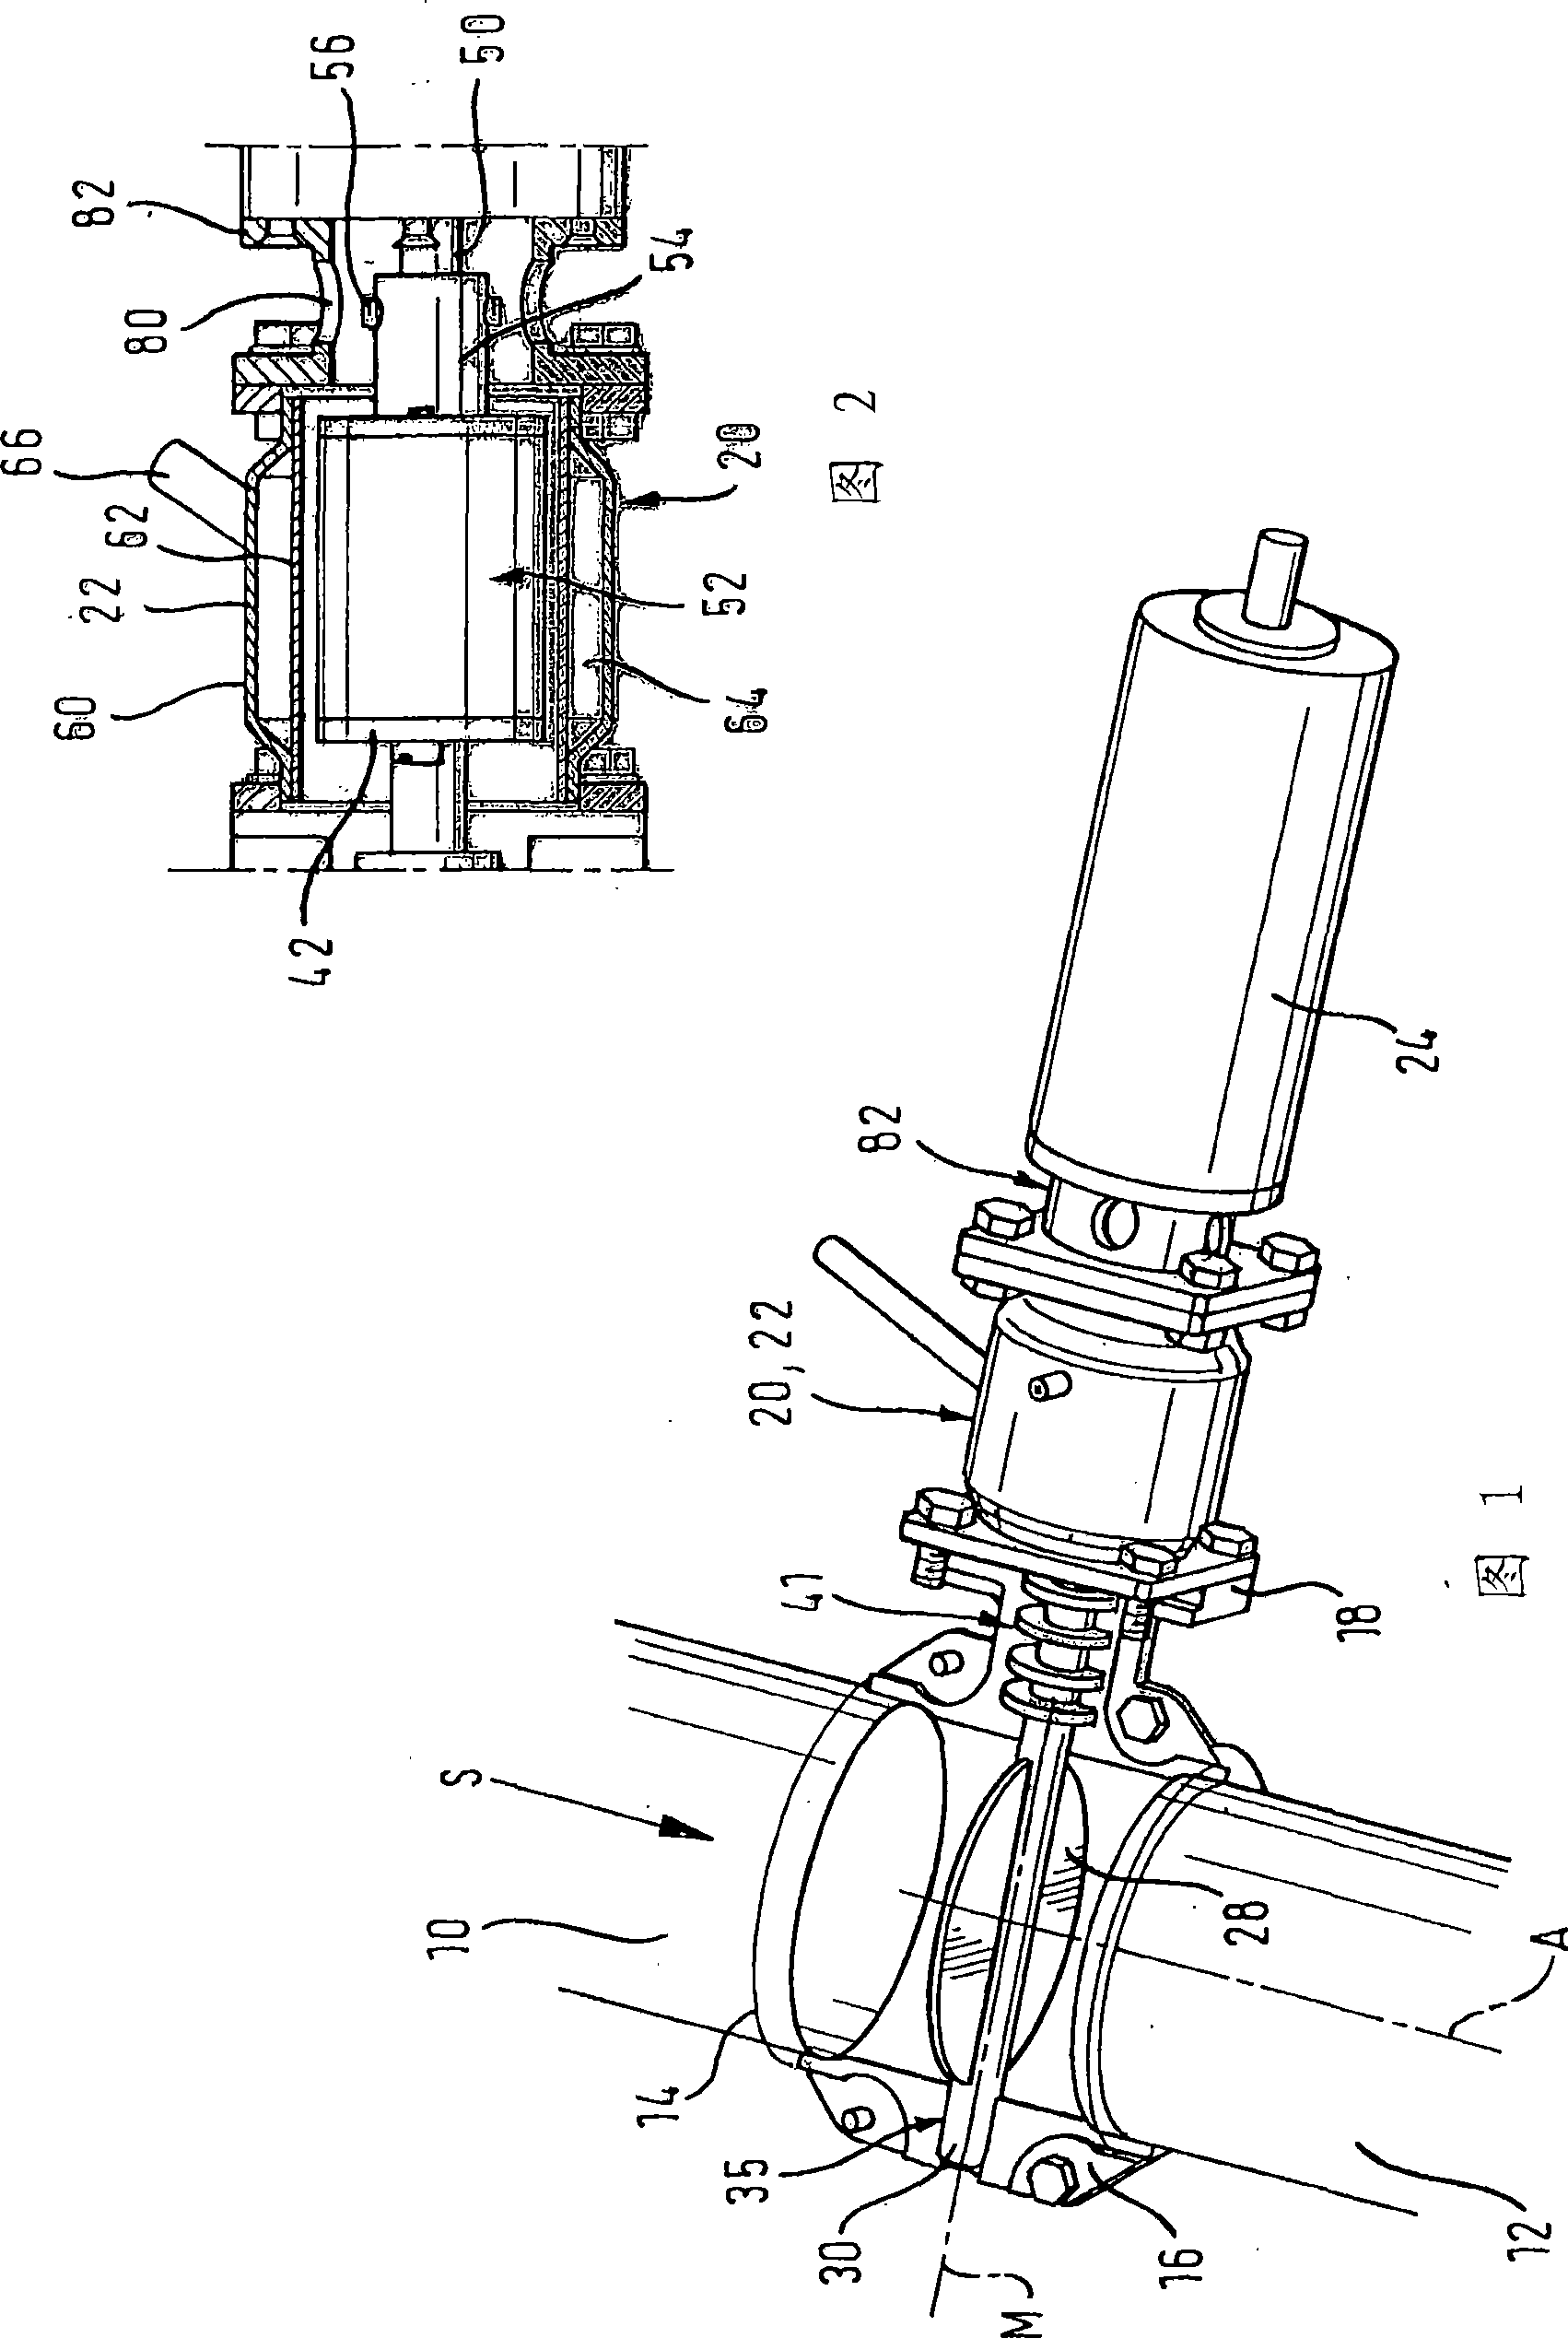 Device for influencing an exhaust gas flow